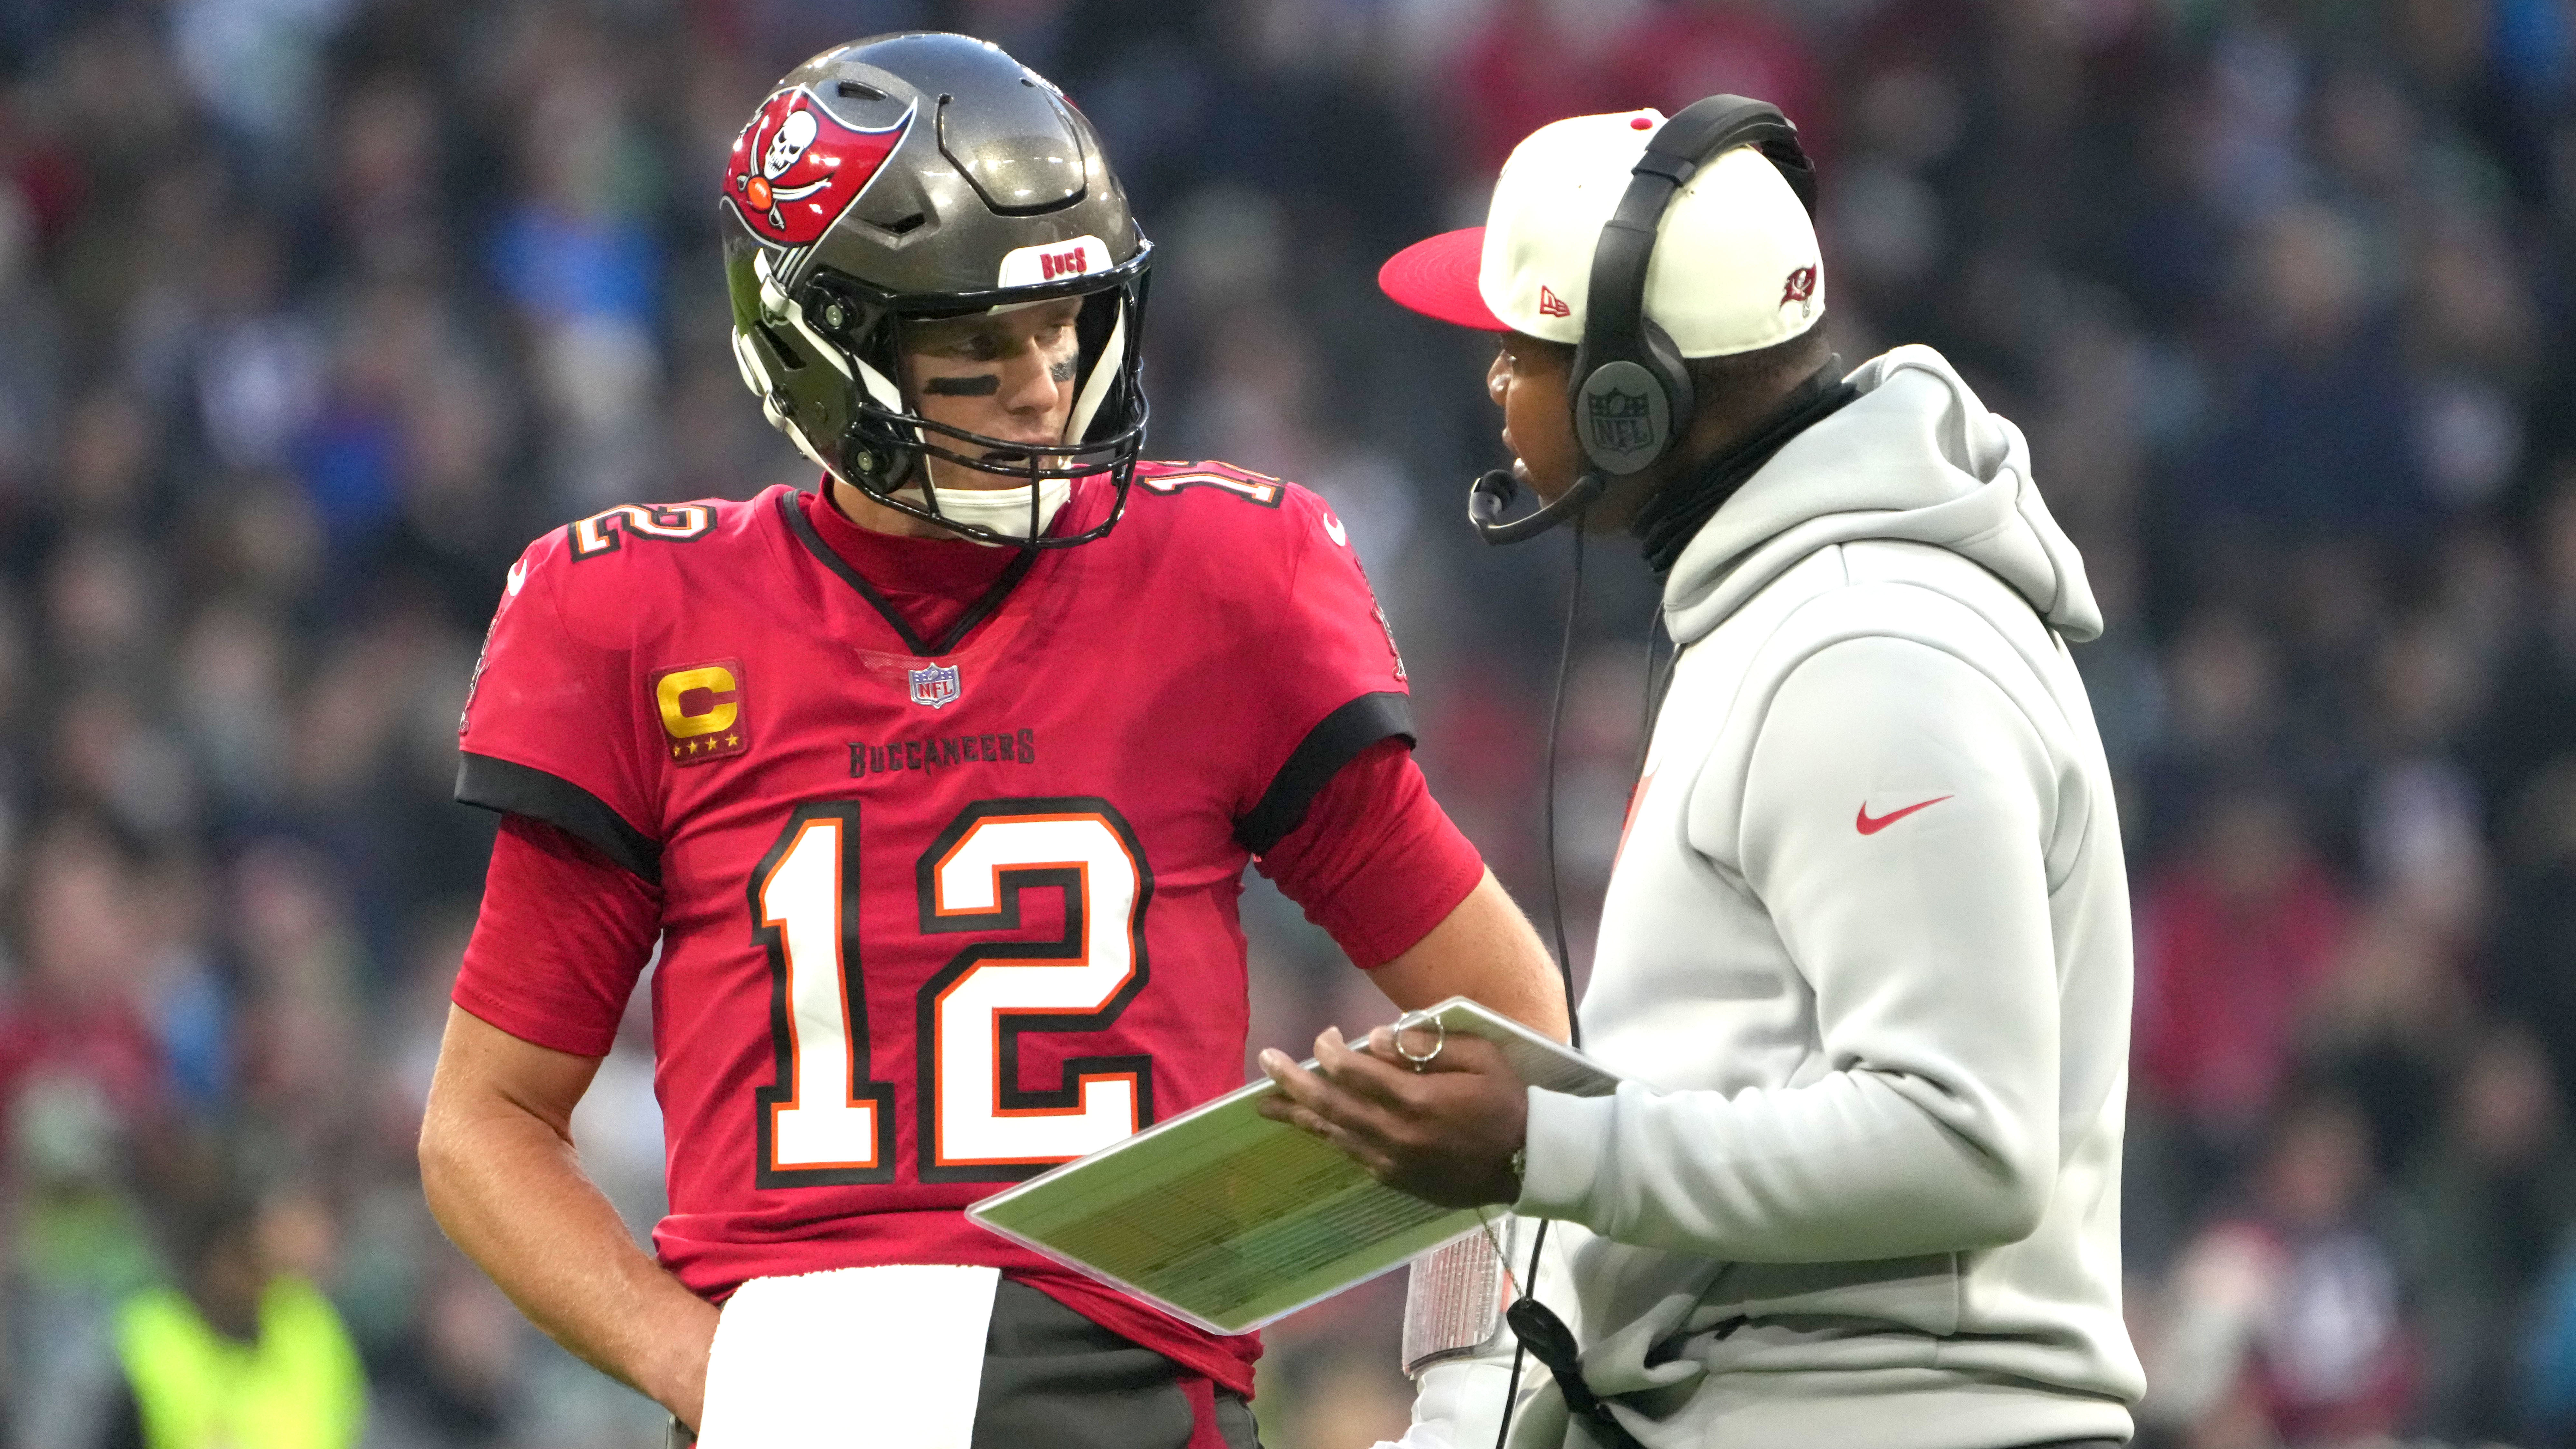 NFL Week 12 Betting: Odds, Spreads, Picks and Predictions for Buccaneers vs. Browns